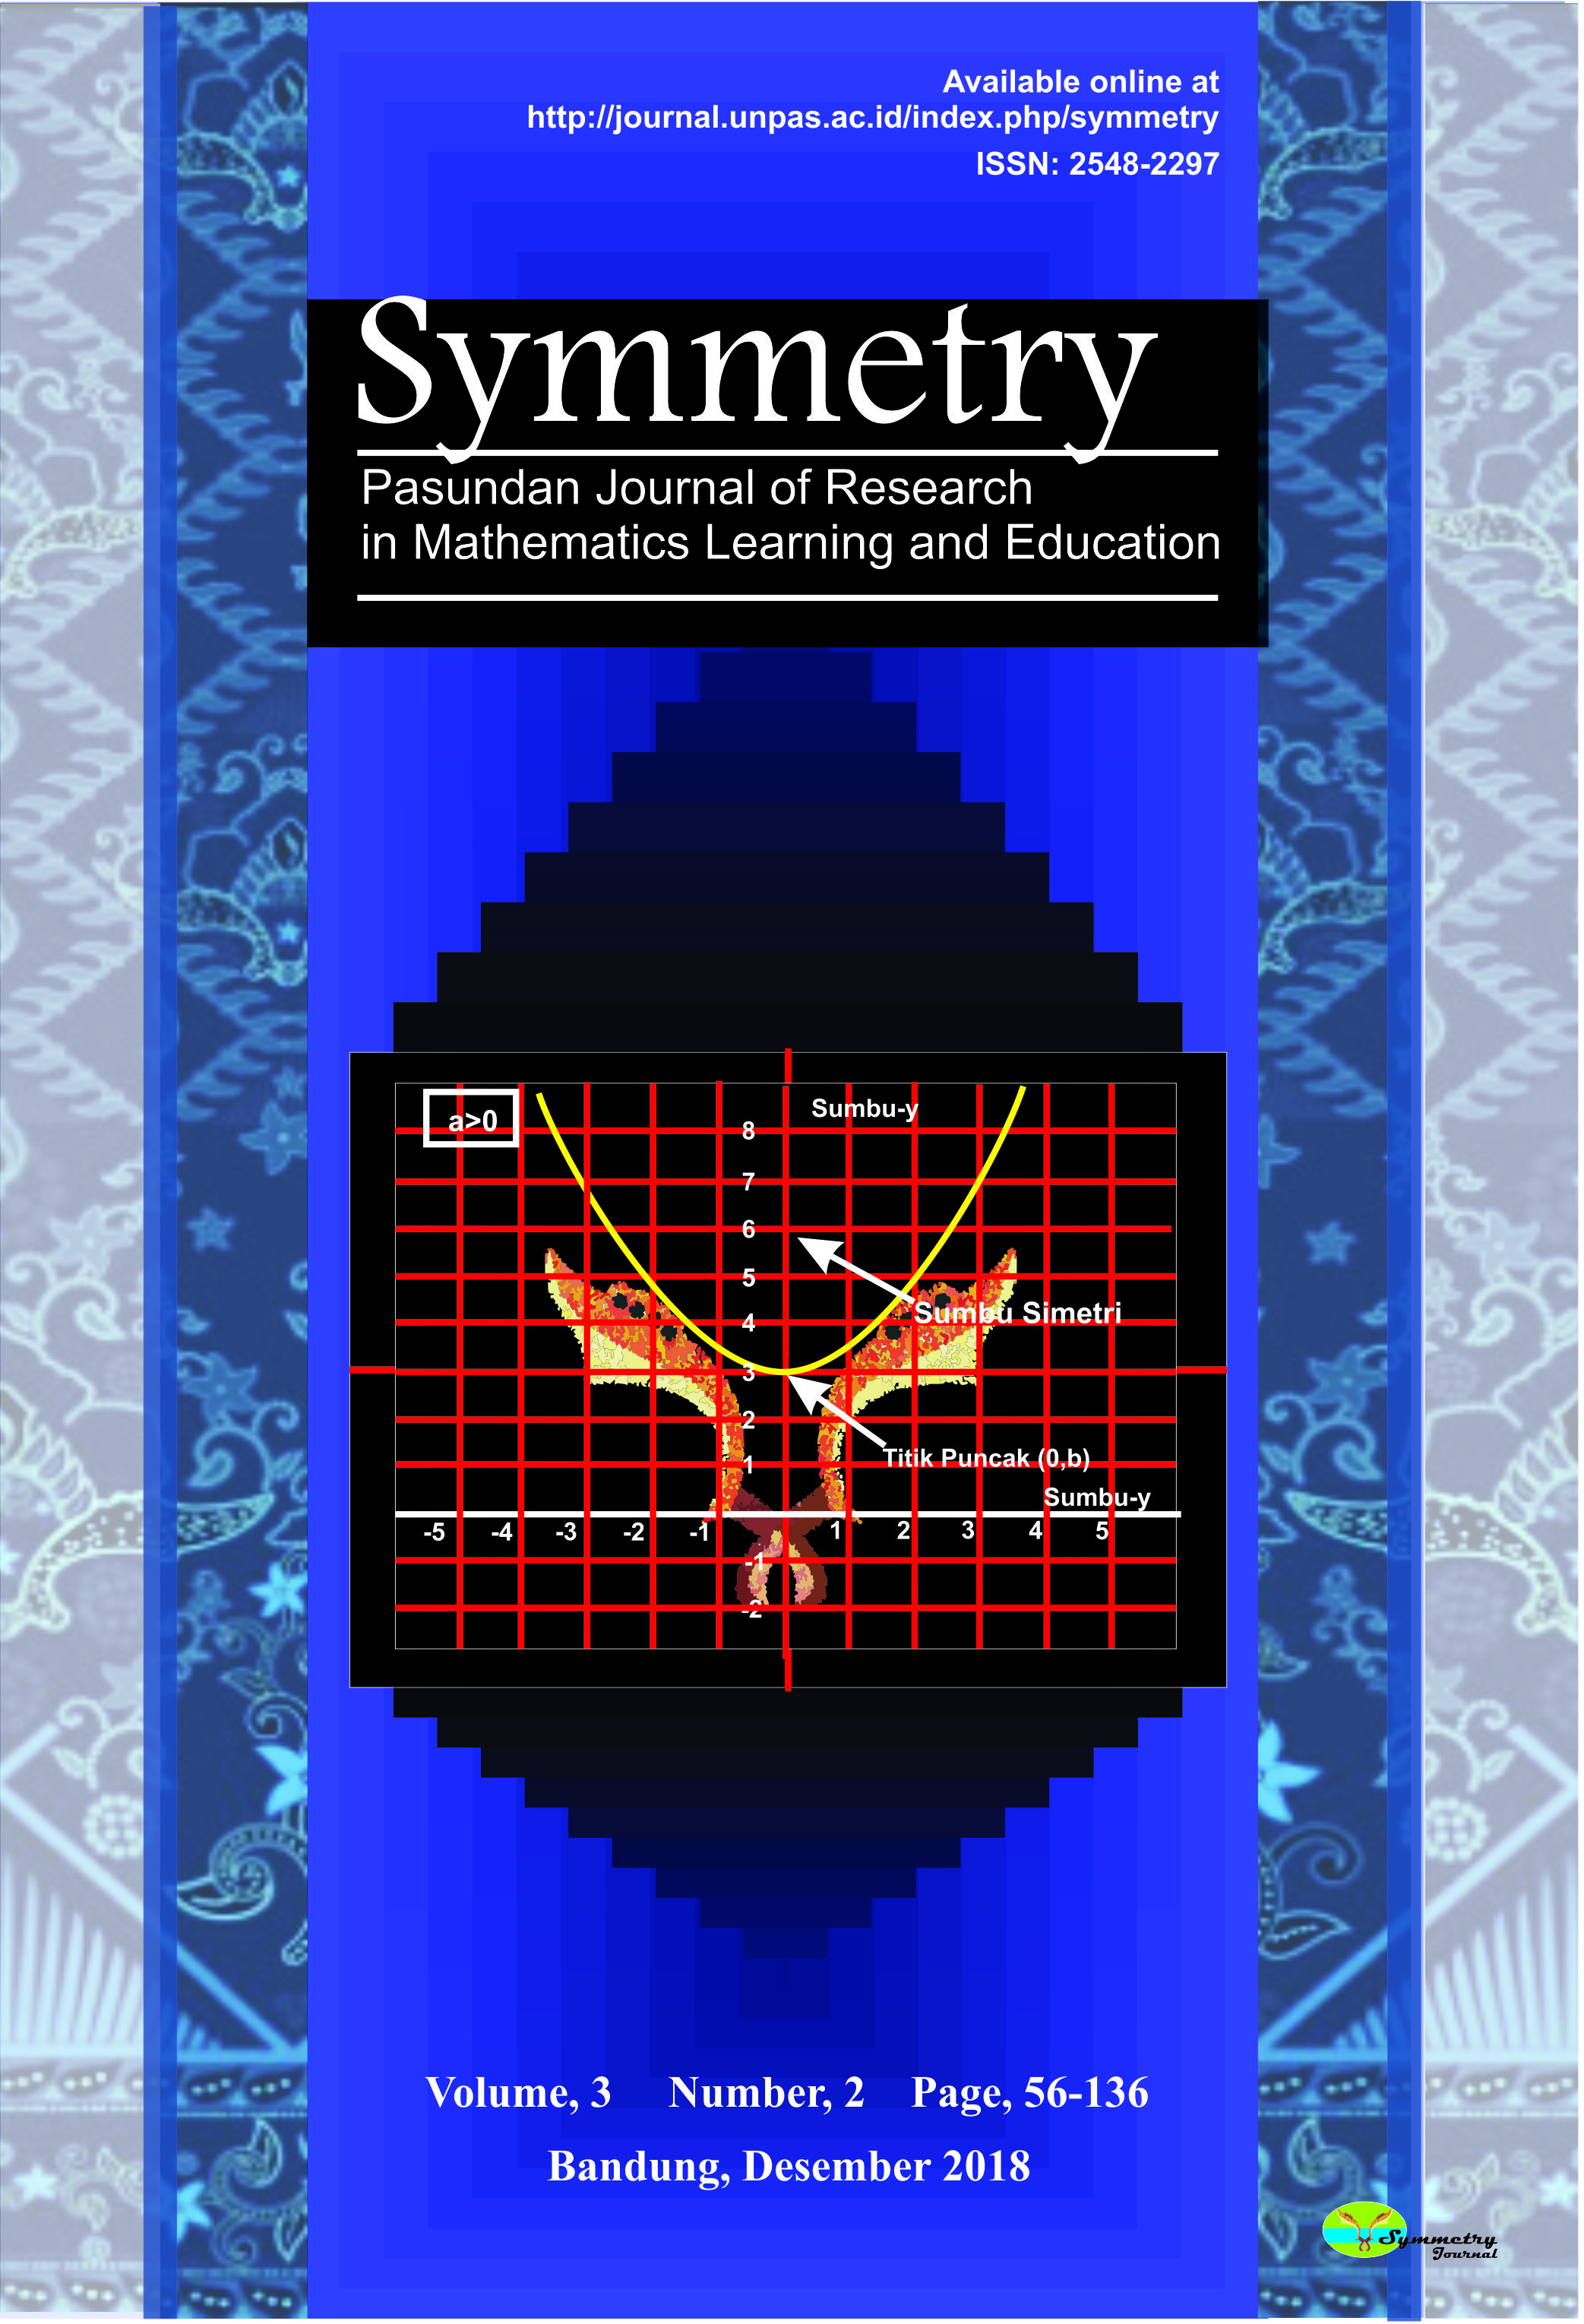 					View Vol. 6 No. 2 (2021): Symmetry: Pasundan Journal of Research in Mathematics Learning and Education
				